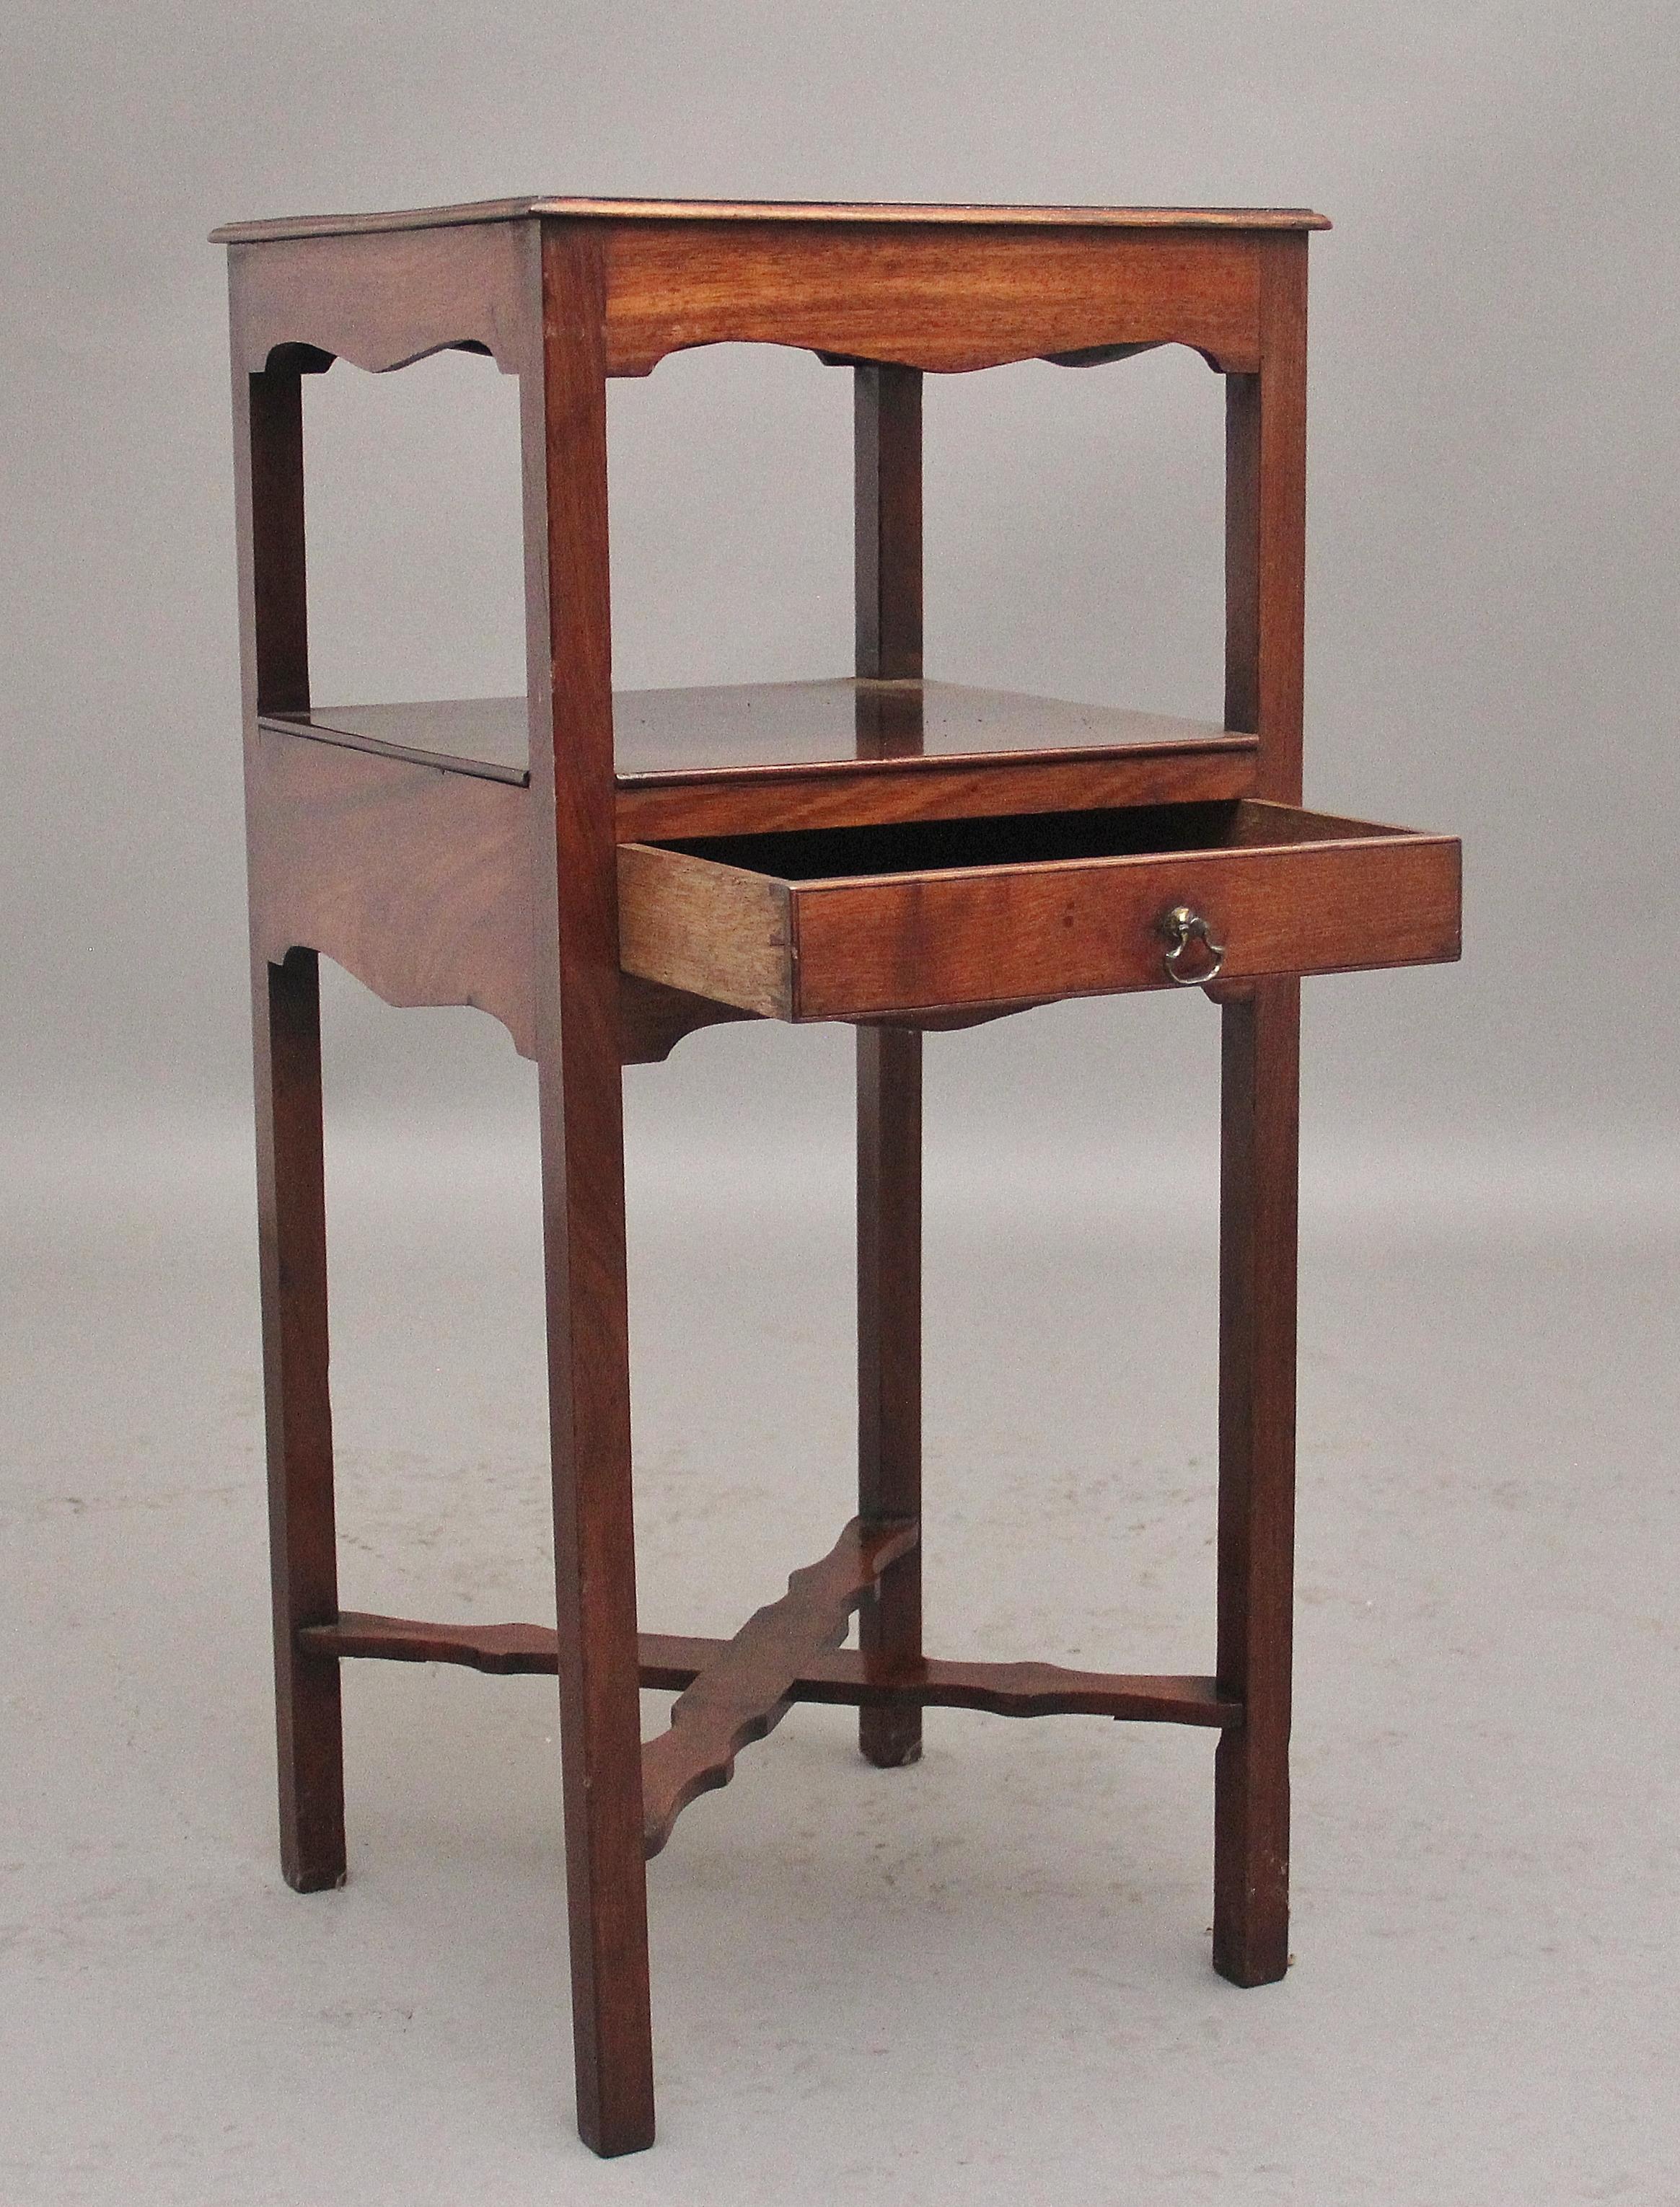 Early 19th Century mahogany bedside table, the top tier having a shaped boarder and frieze, the middle tier having an oak lined frieze drawer with original brass handle, standing on square legs united by shaped cross stretcher.  Circa 1830.